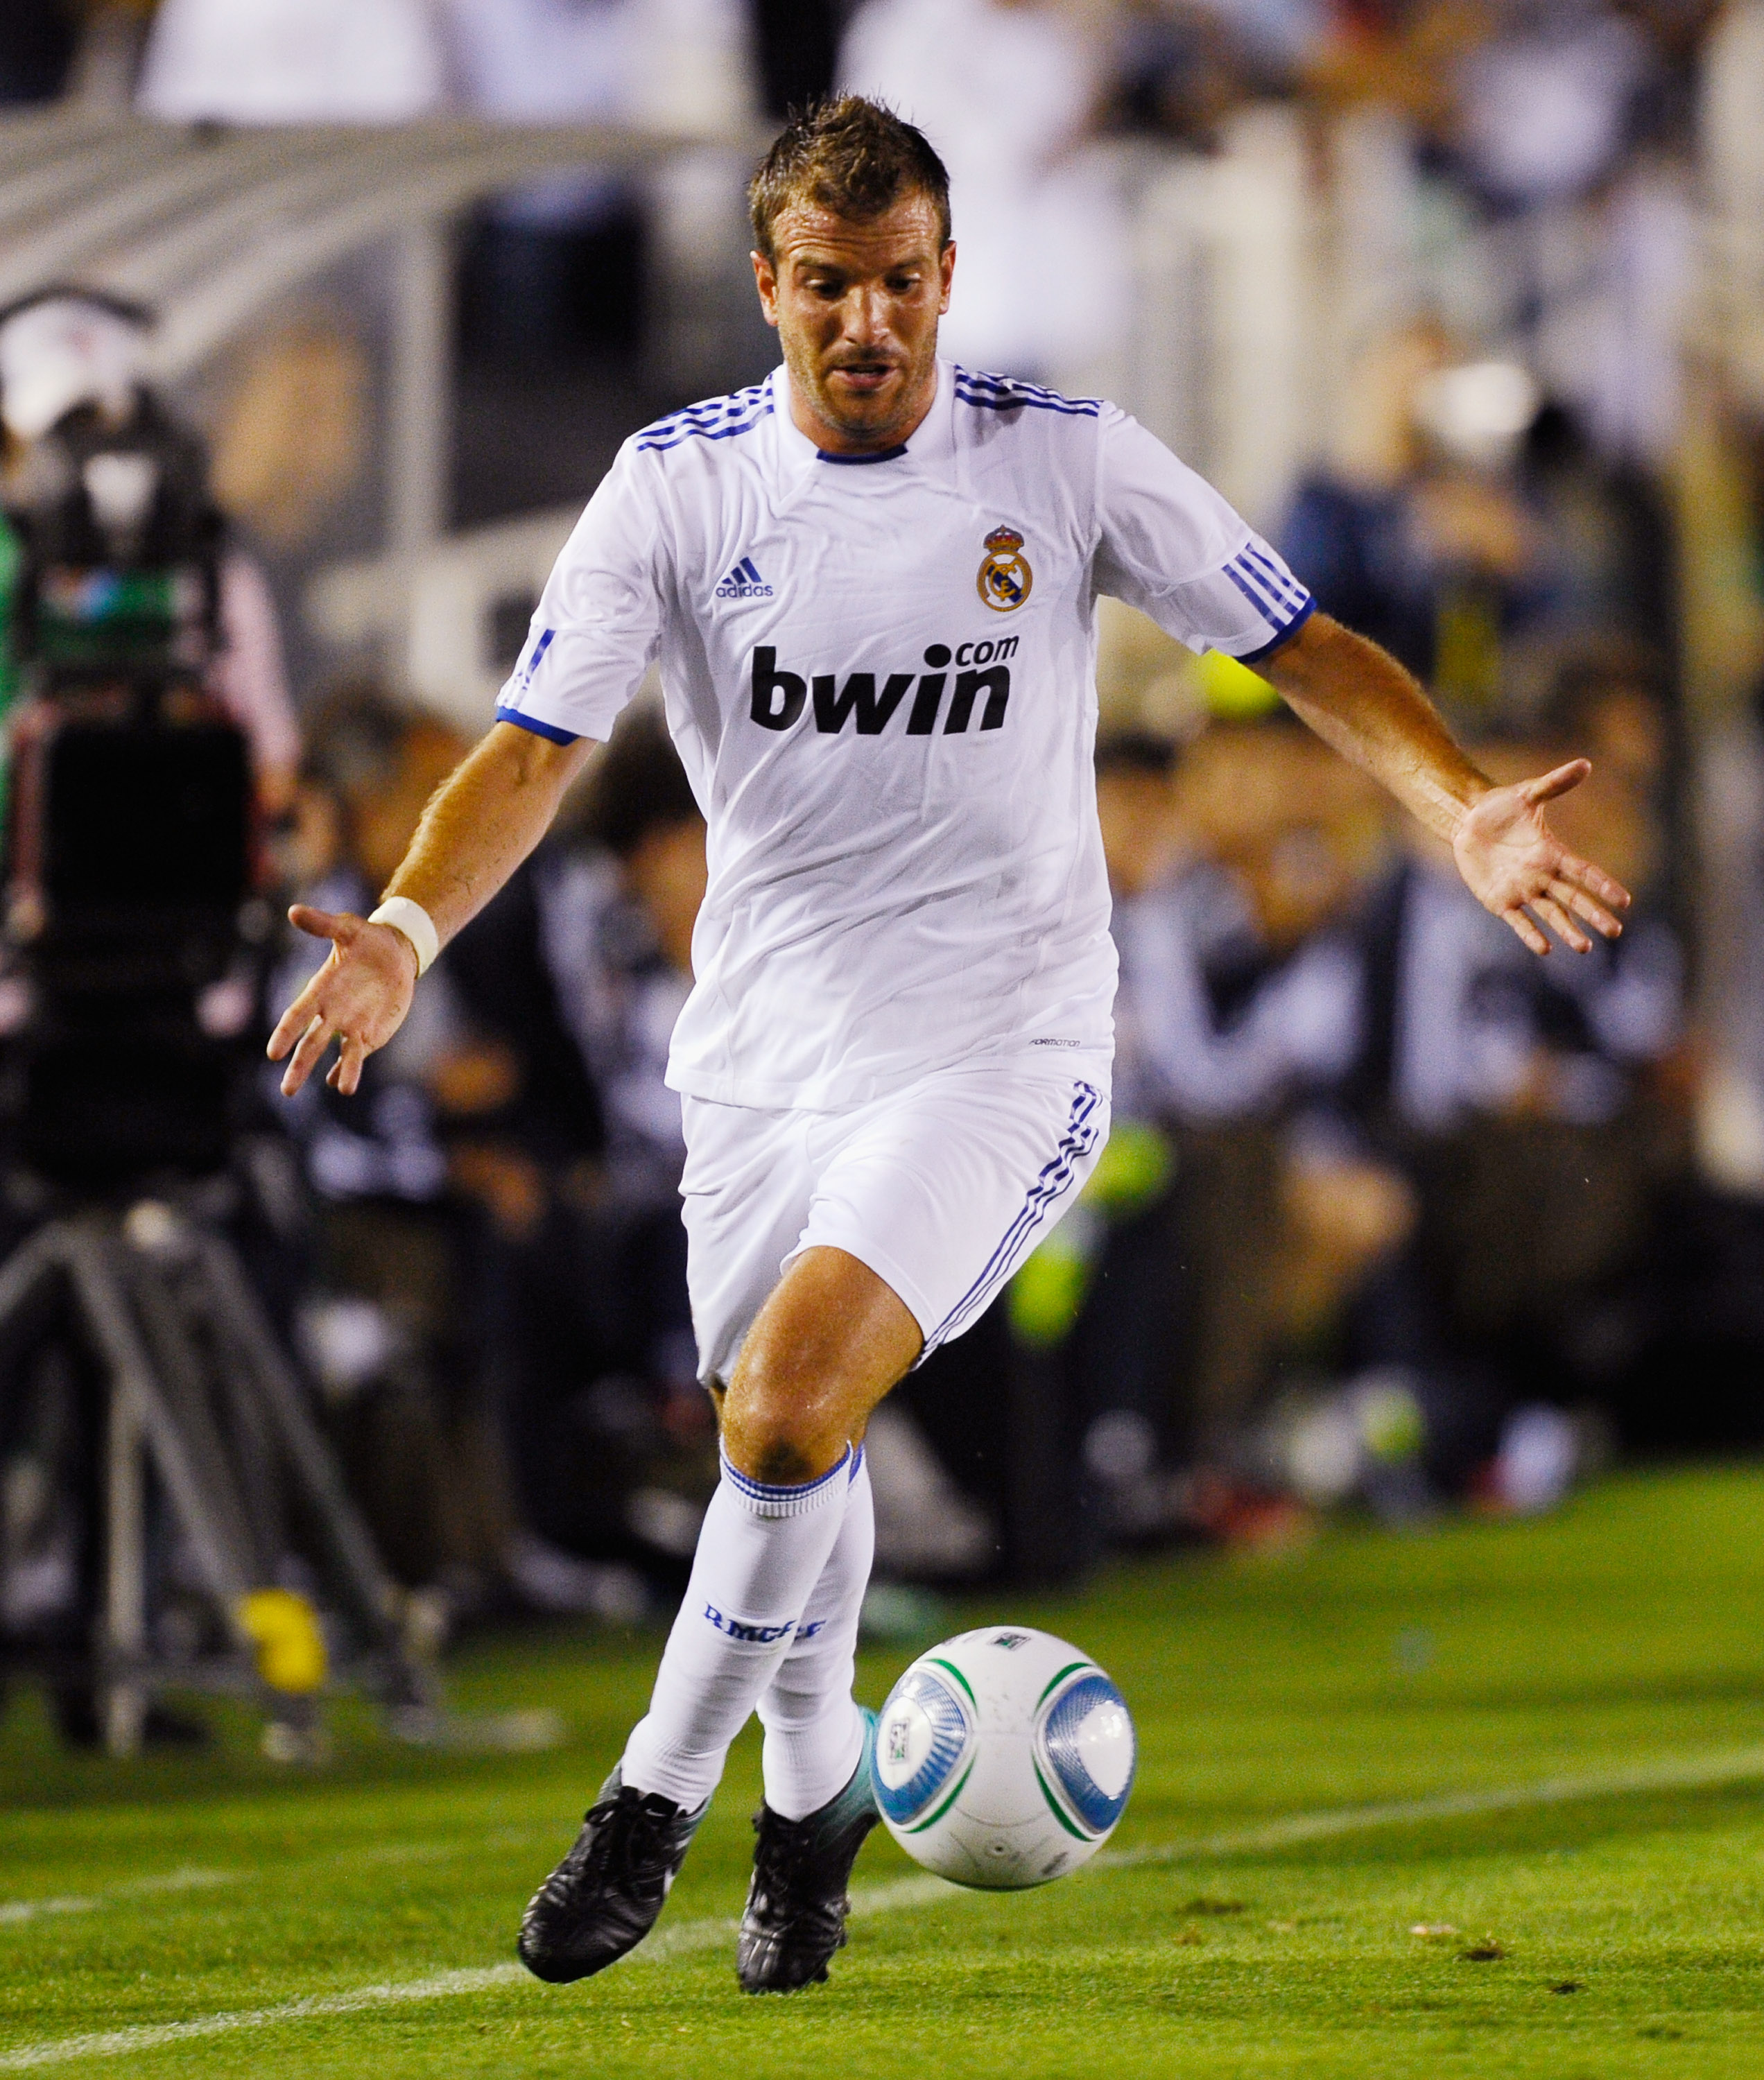 PASADENA, CA - AUGUST 07:  Rafael van der Vaart #23 of Real Madrid during the pre-season friendly soccer match against Los Angeles Galaxy on August 7, 2010 at the Rose Bowl in Pasadena, California. Real Madrid will travel back to Spain after the soccer ma